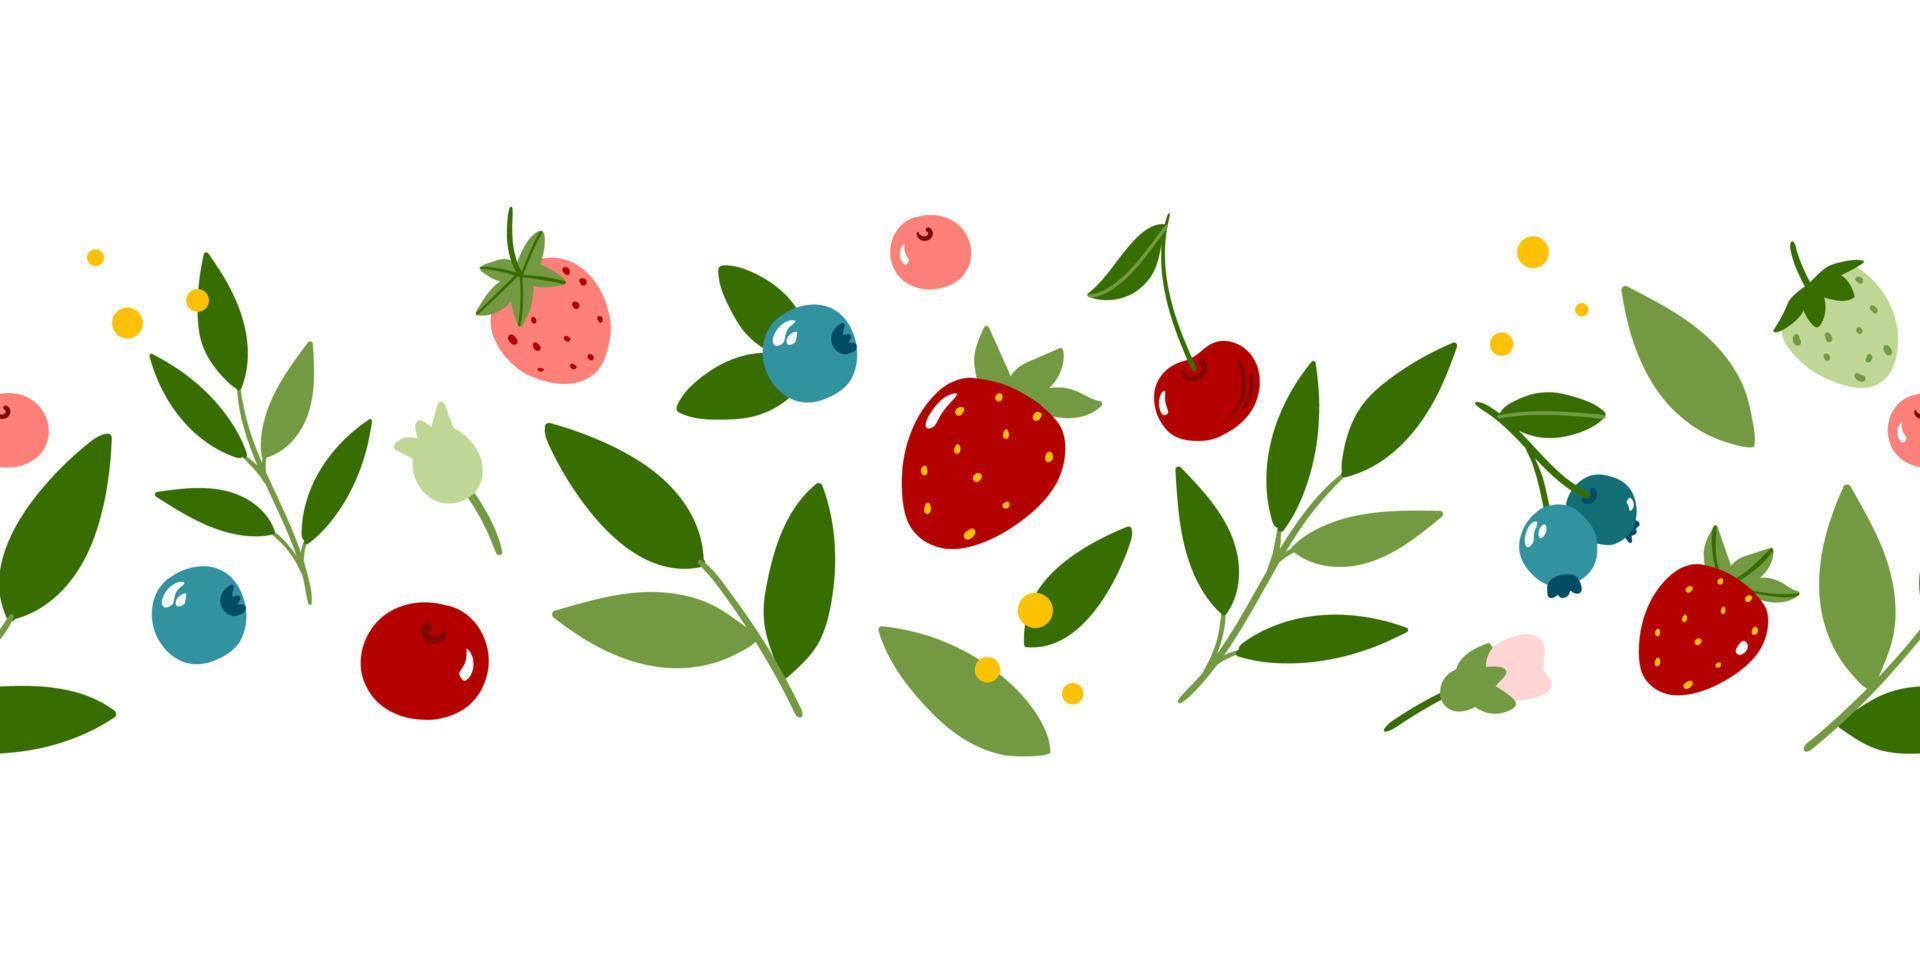 Summer horizontal seamless border with hand-drawn forest berries and leaves. Vector illustration in doodle style